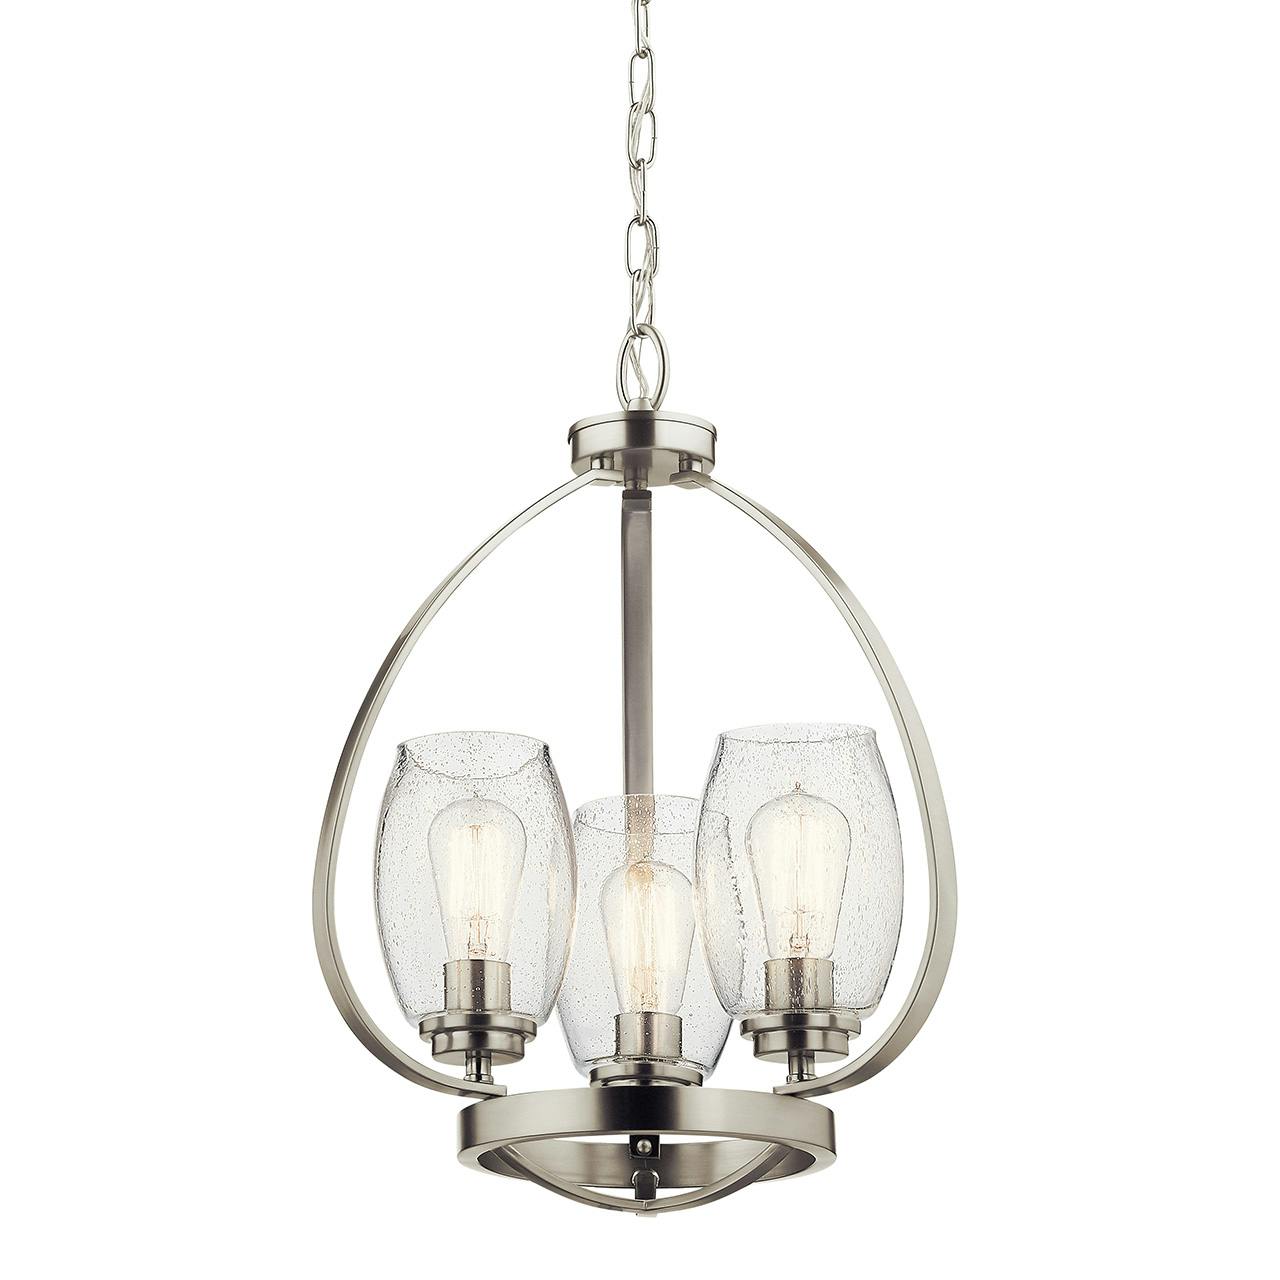 Tuscany 3 Light Mini Chandelier Nickel without the canopy on a white background